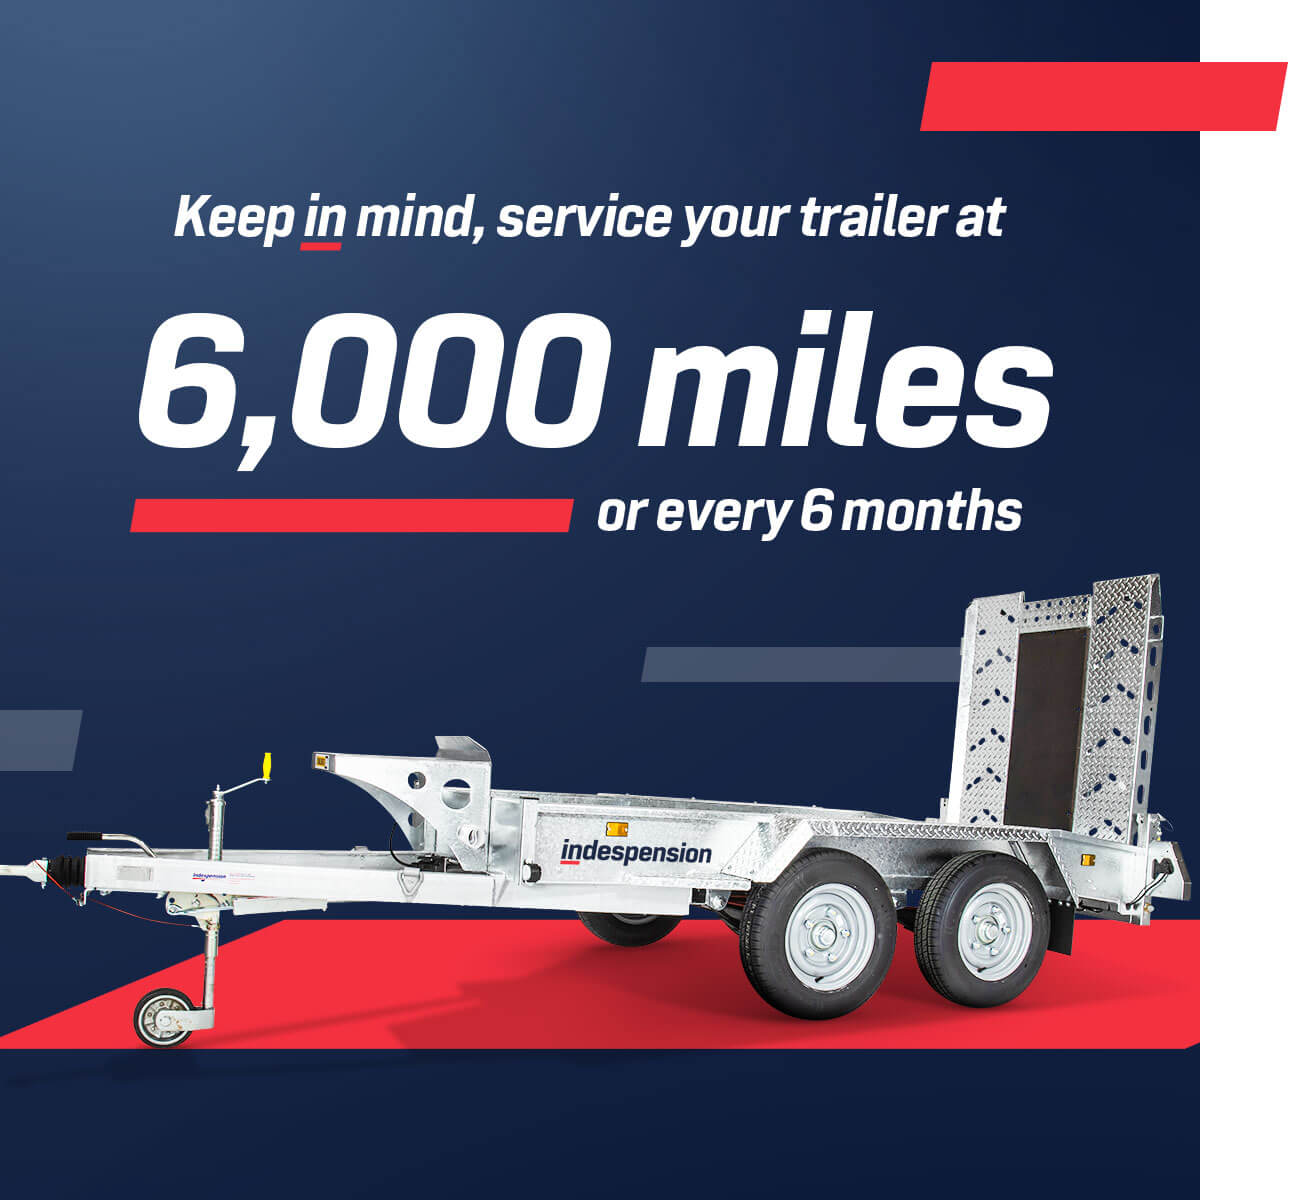 Keep in mind, service your trailer at 6000 miles or every 6 months